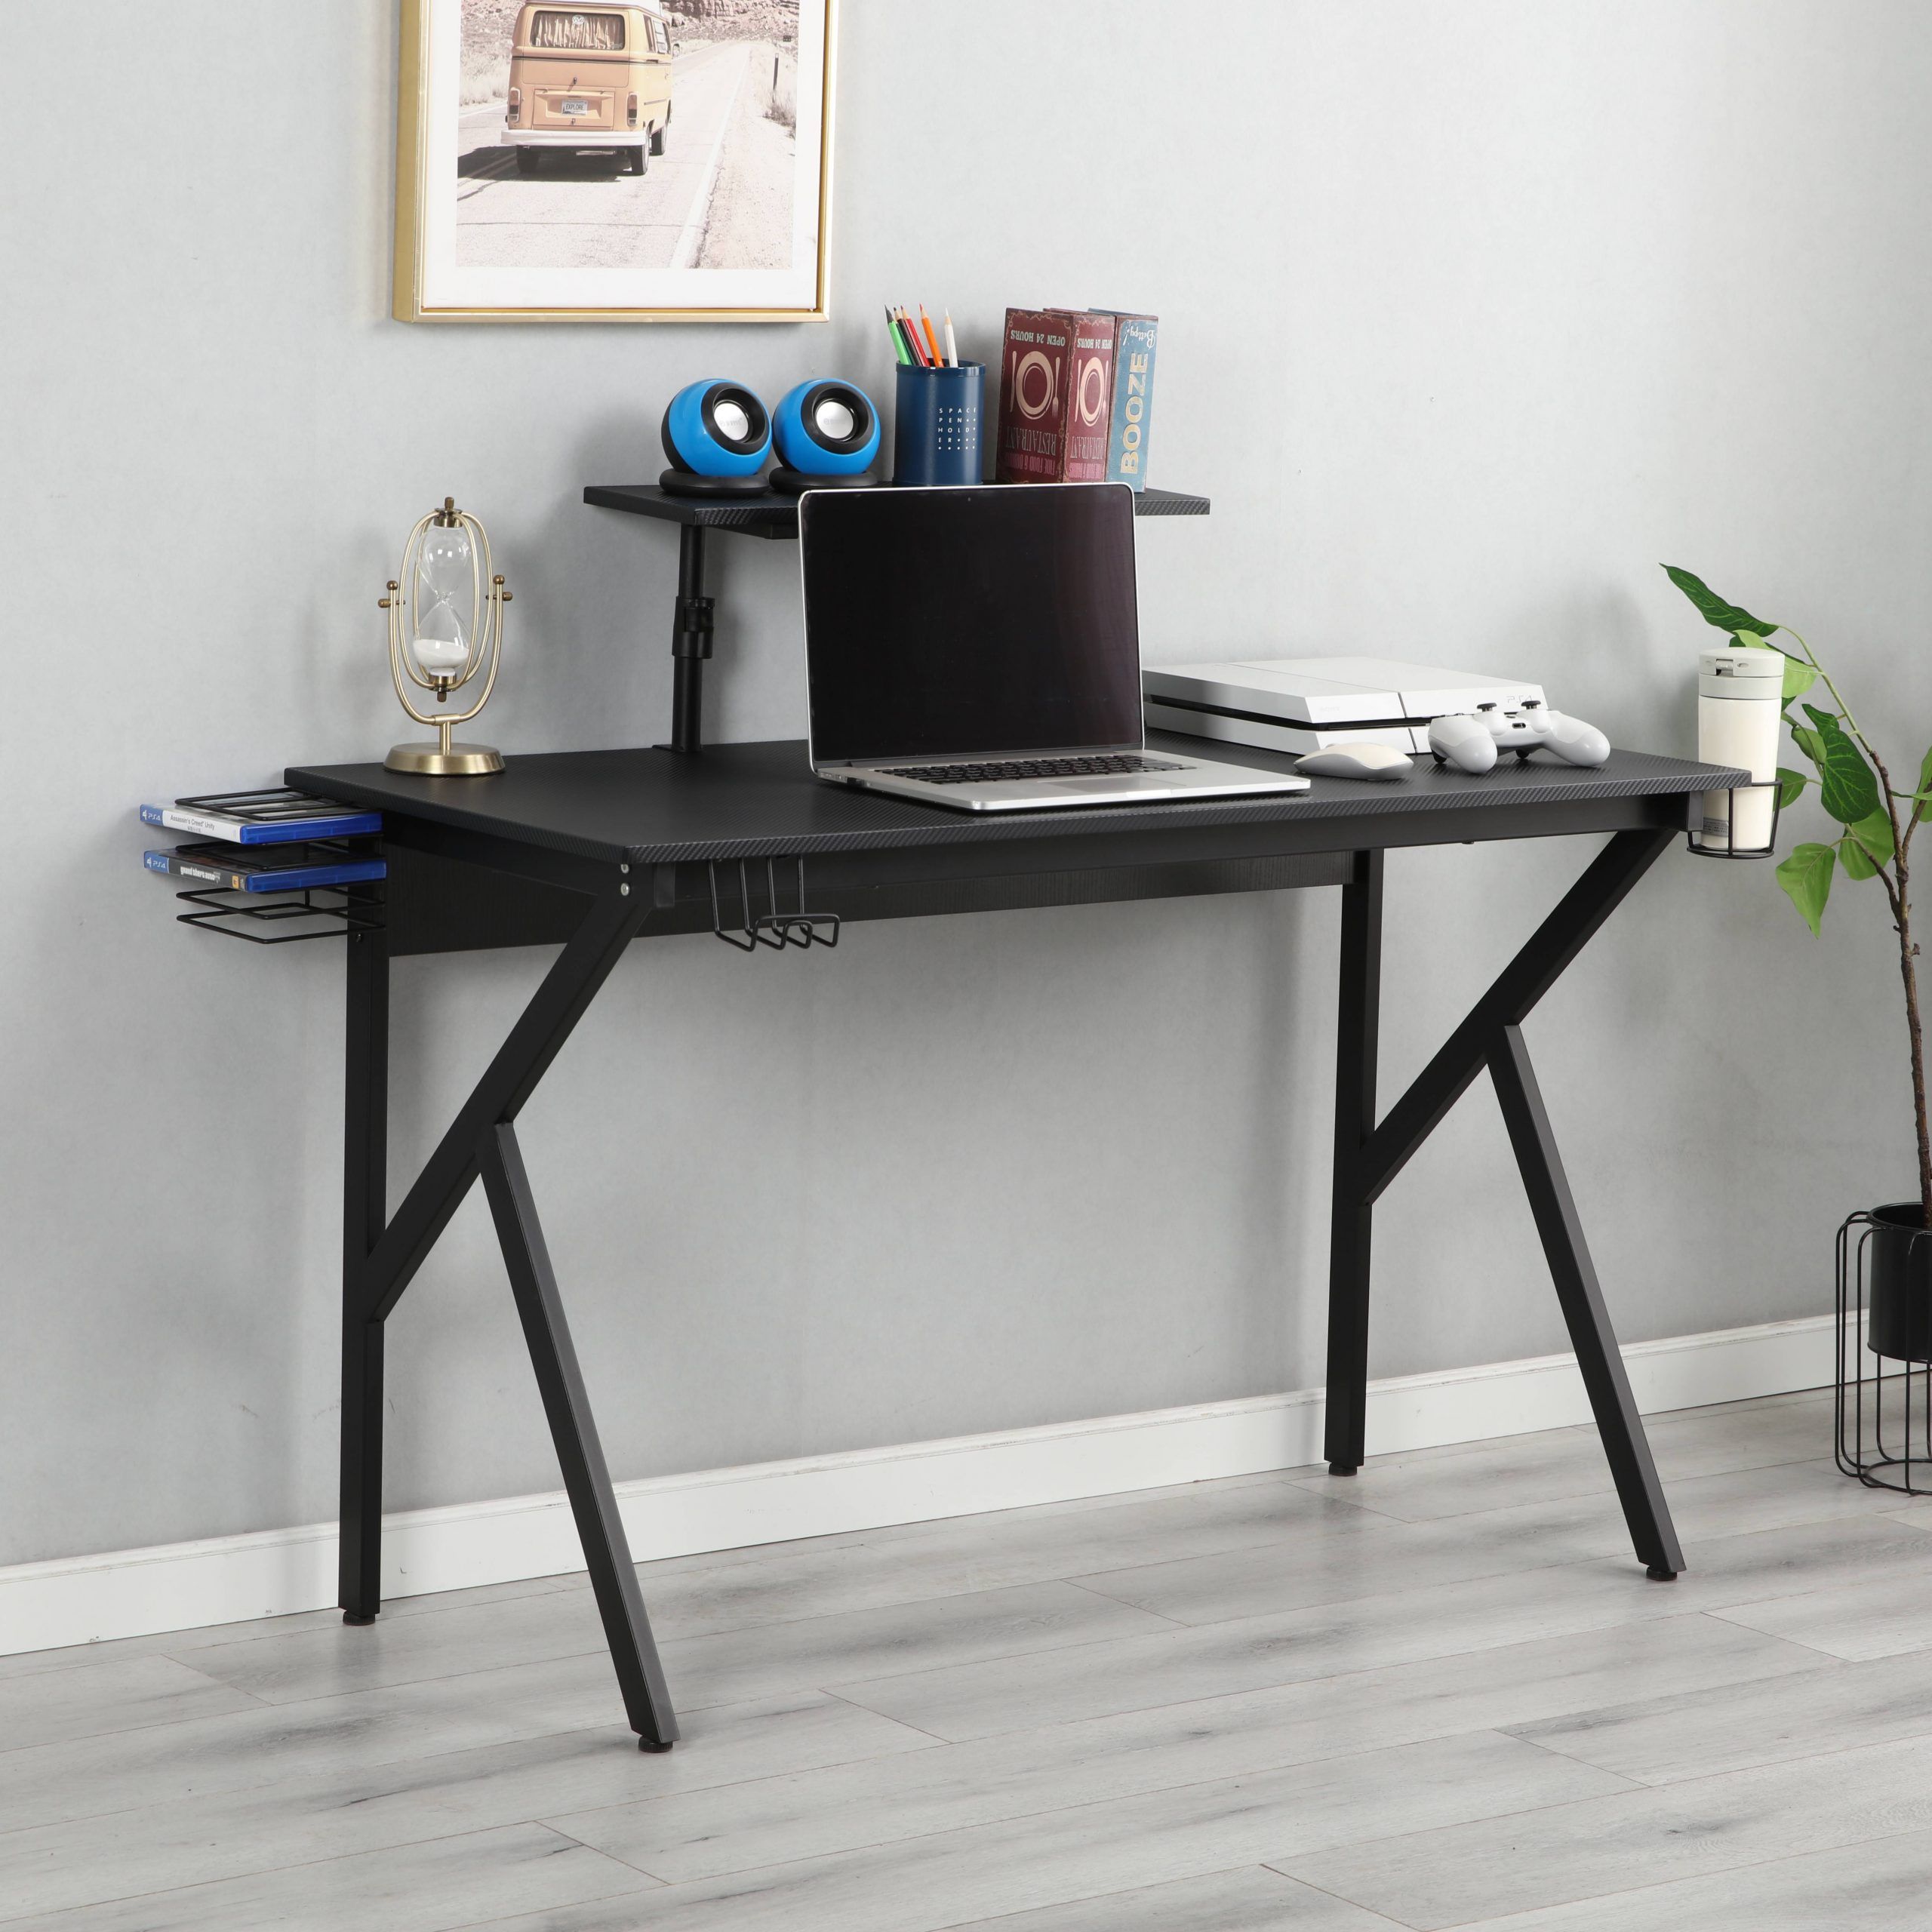 Urhomepro Modern Simple Office Desk, Heavy Duty Corner Computer Desk Intended For Glass White Wood And Black Metal Office Desks (View 1 of 15)